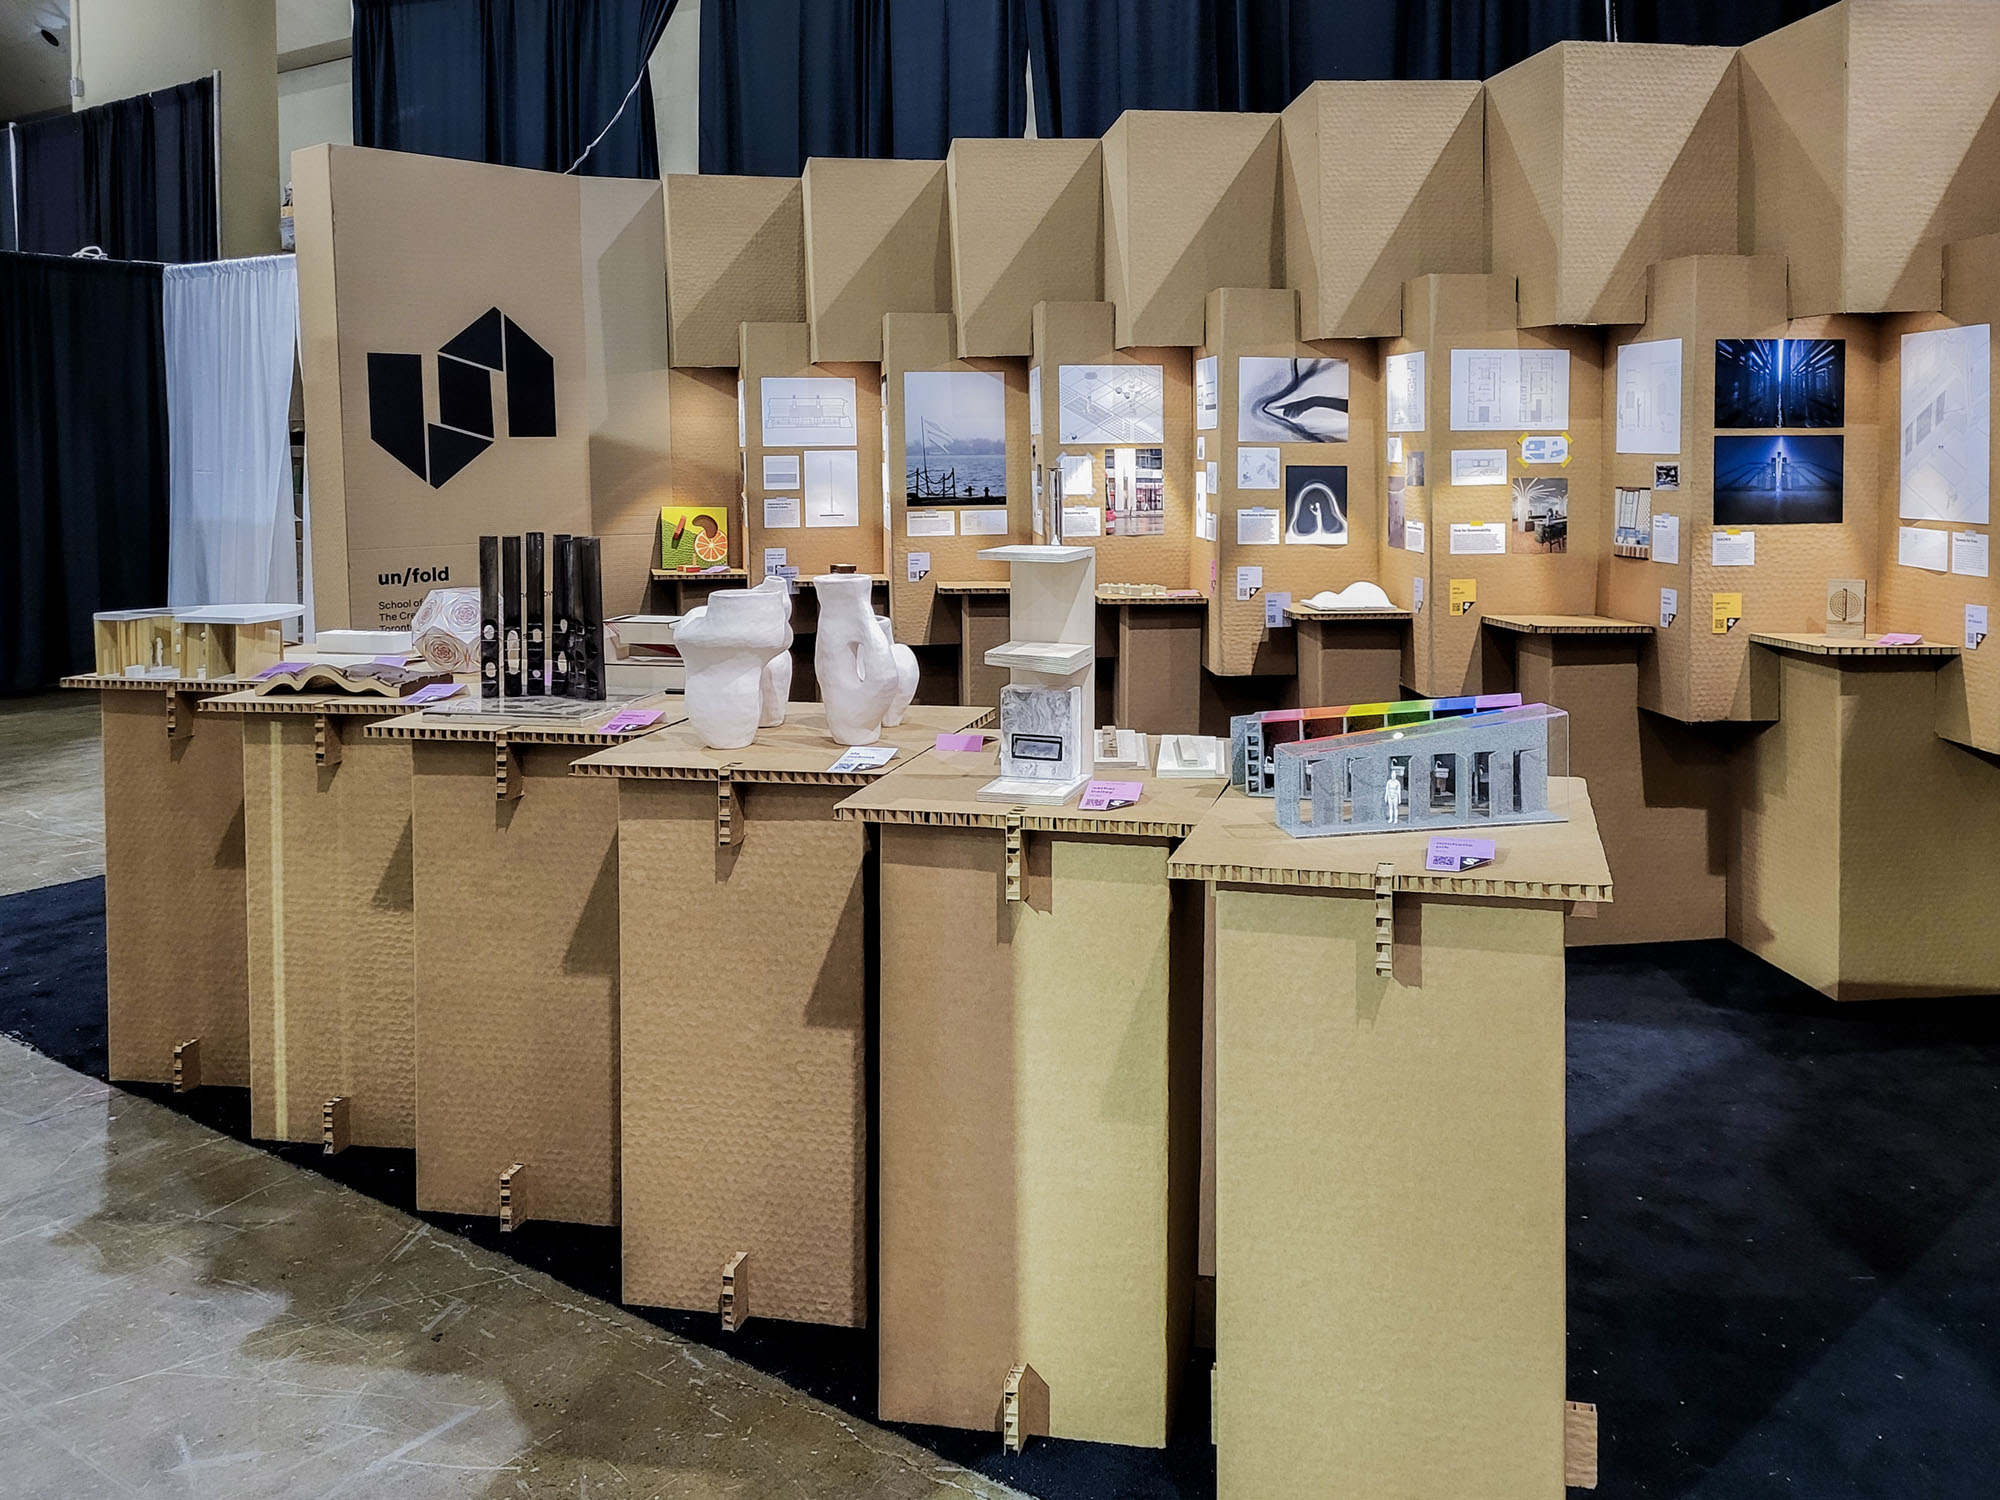  A brown cardboard booth on a black carpet with plinths in front of it. The booth unfolds and folds, revealing student work in every corner and fold.